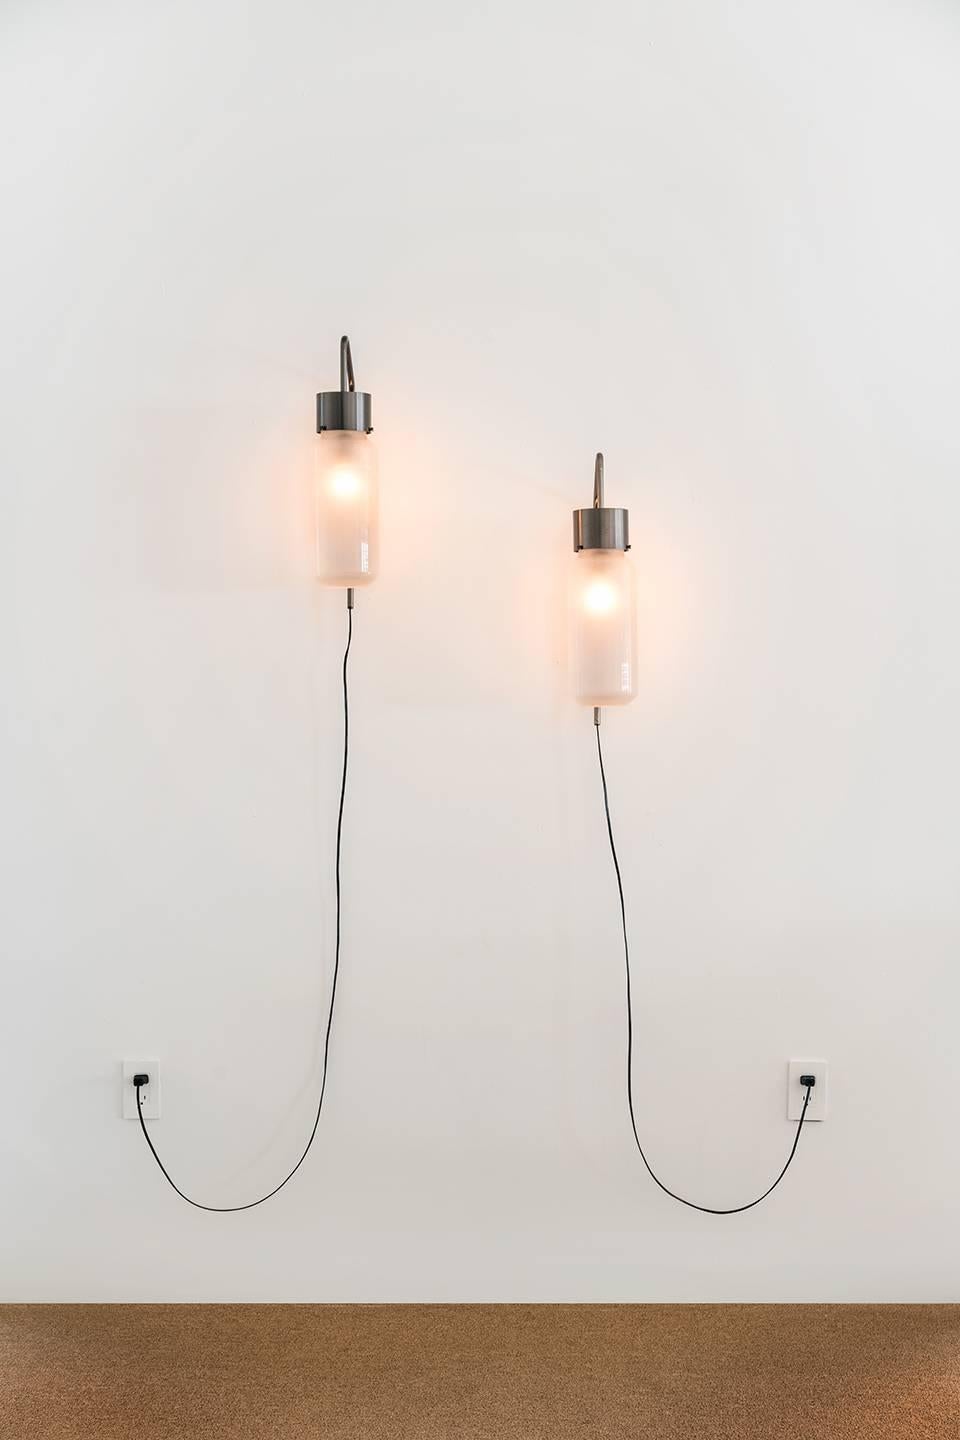 Mid-Century Modern Luigi Caccia Dominioni, LP10 Wall Lamps / Sconces, Steel, Frosted Glass, 1958